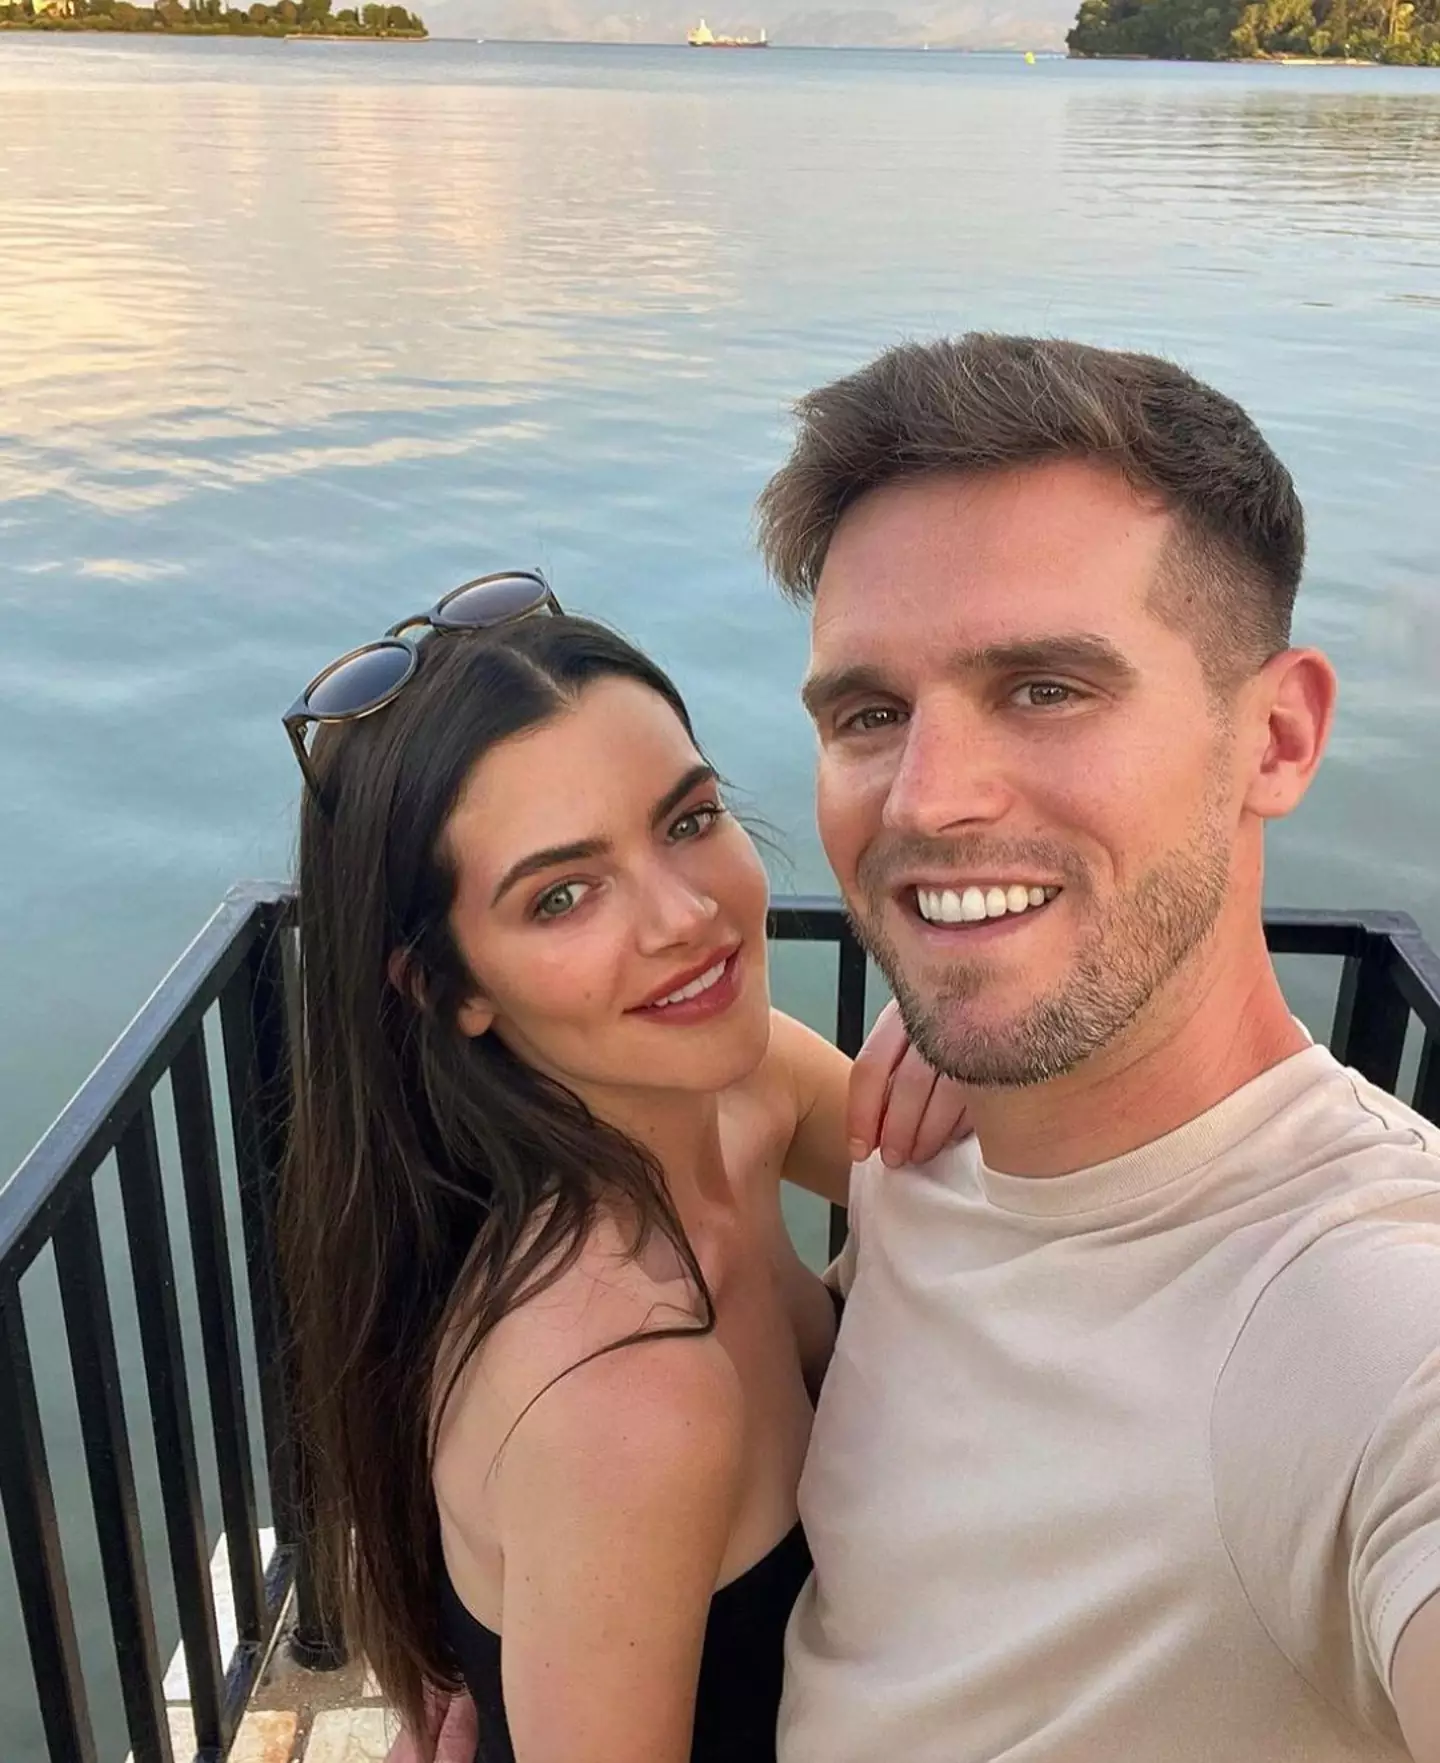 Gaz's last grid post with Emma was over a month ago.